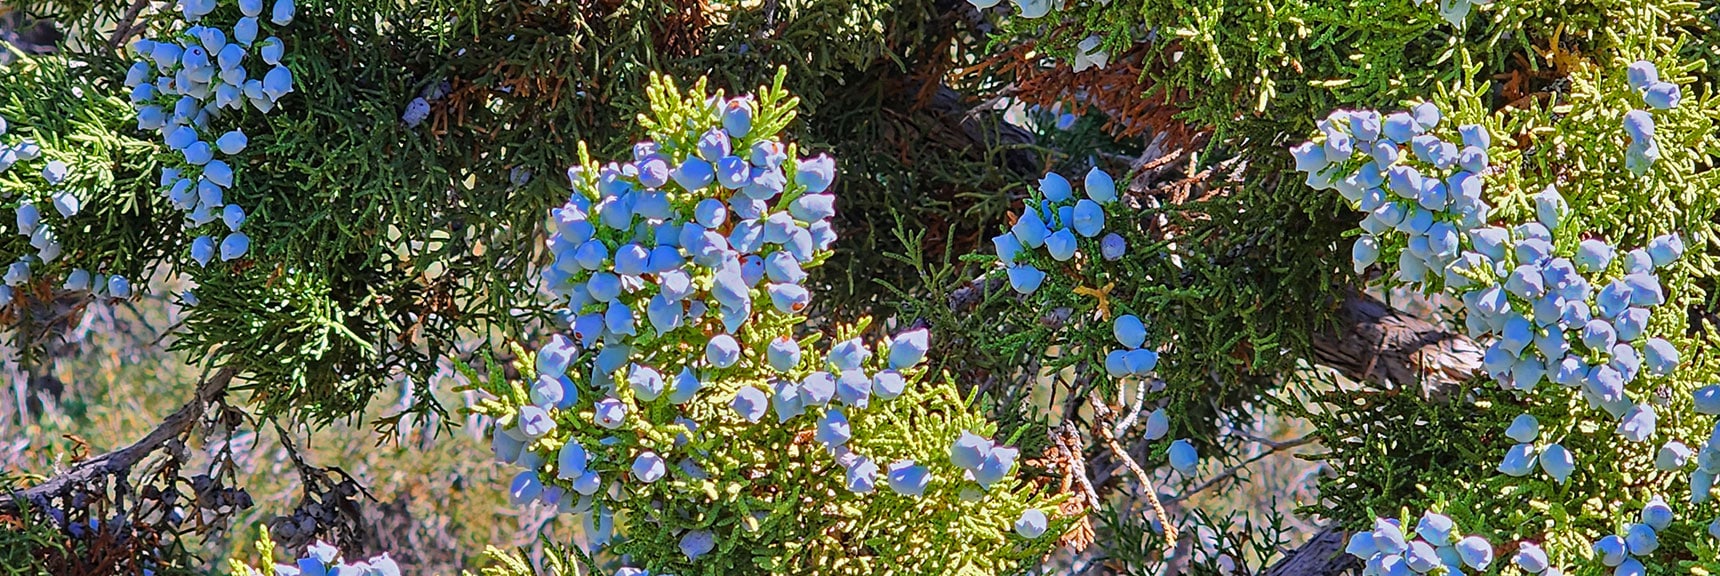 Bright Blue Juniper Berries. In Season This 2nd Week of September. | Red Rock Summit | Lovell Canyon & Rainbow Mountain Wilderness, Nevada